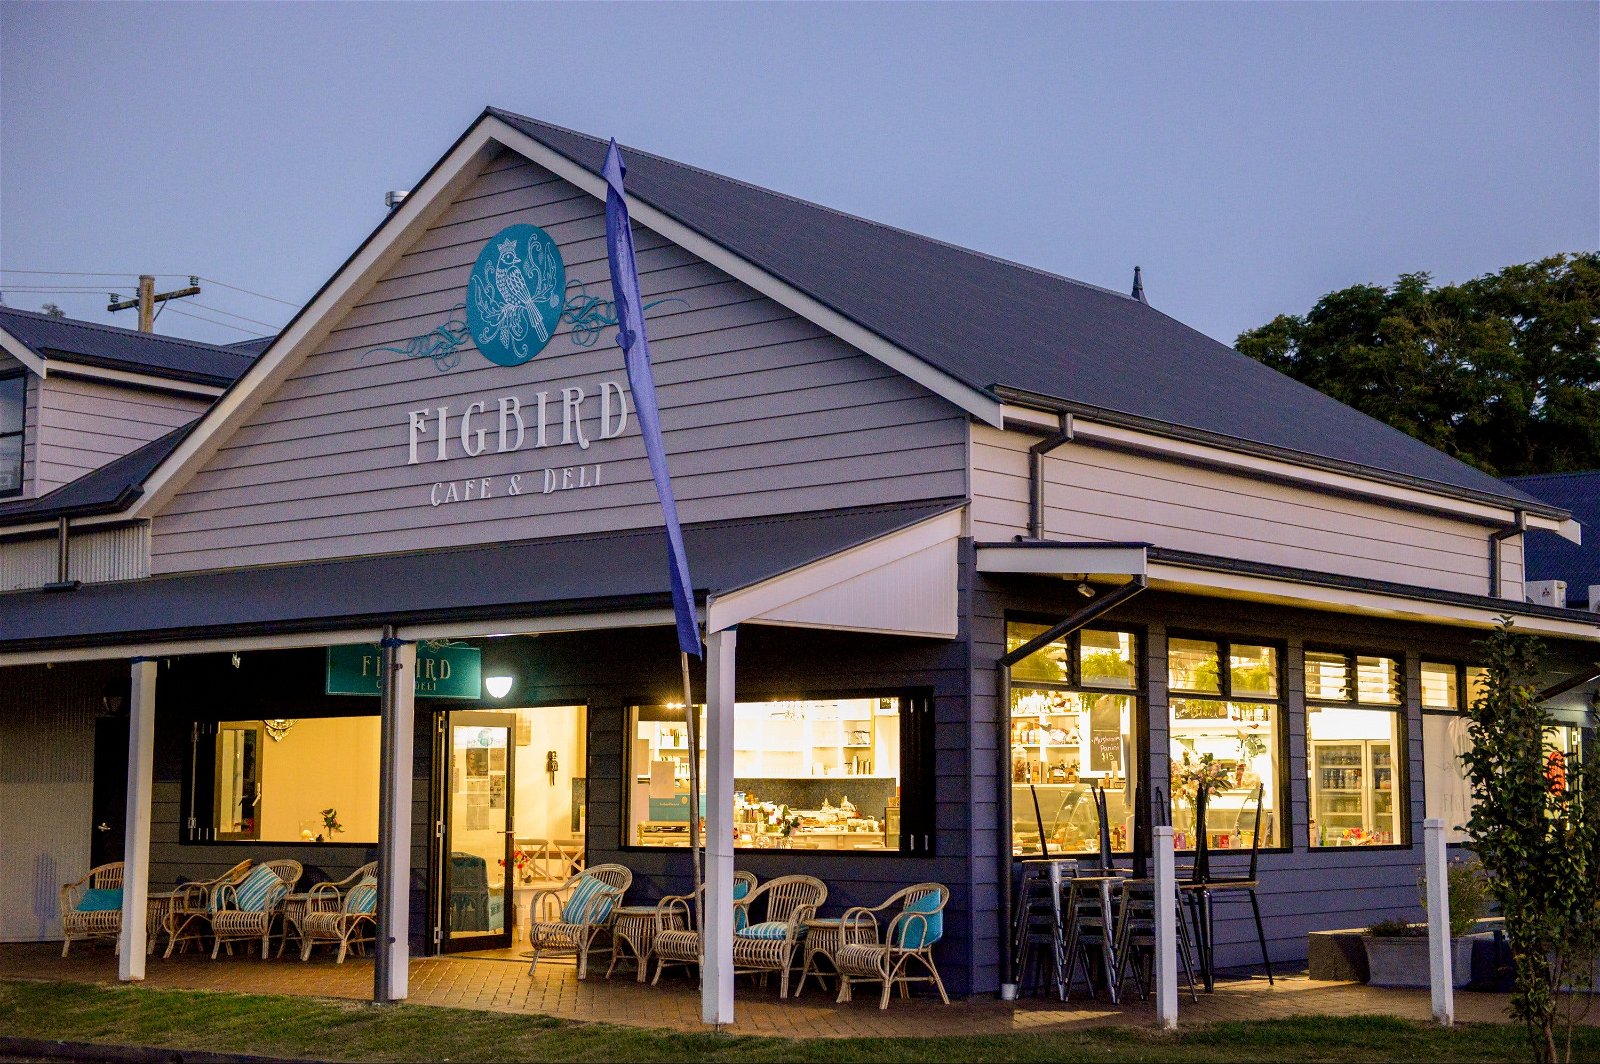 Figbird Cafe and Deli - Northern Rivers Accommodation